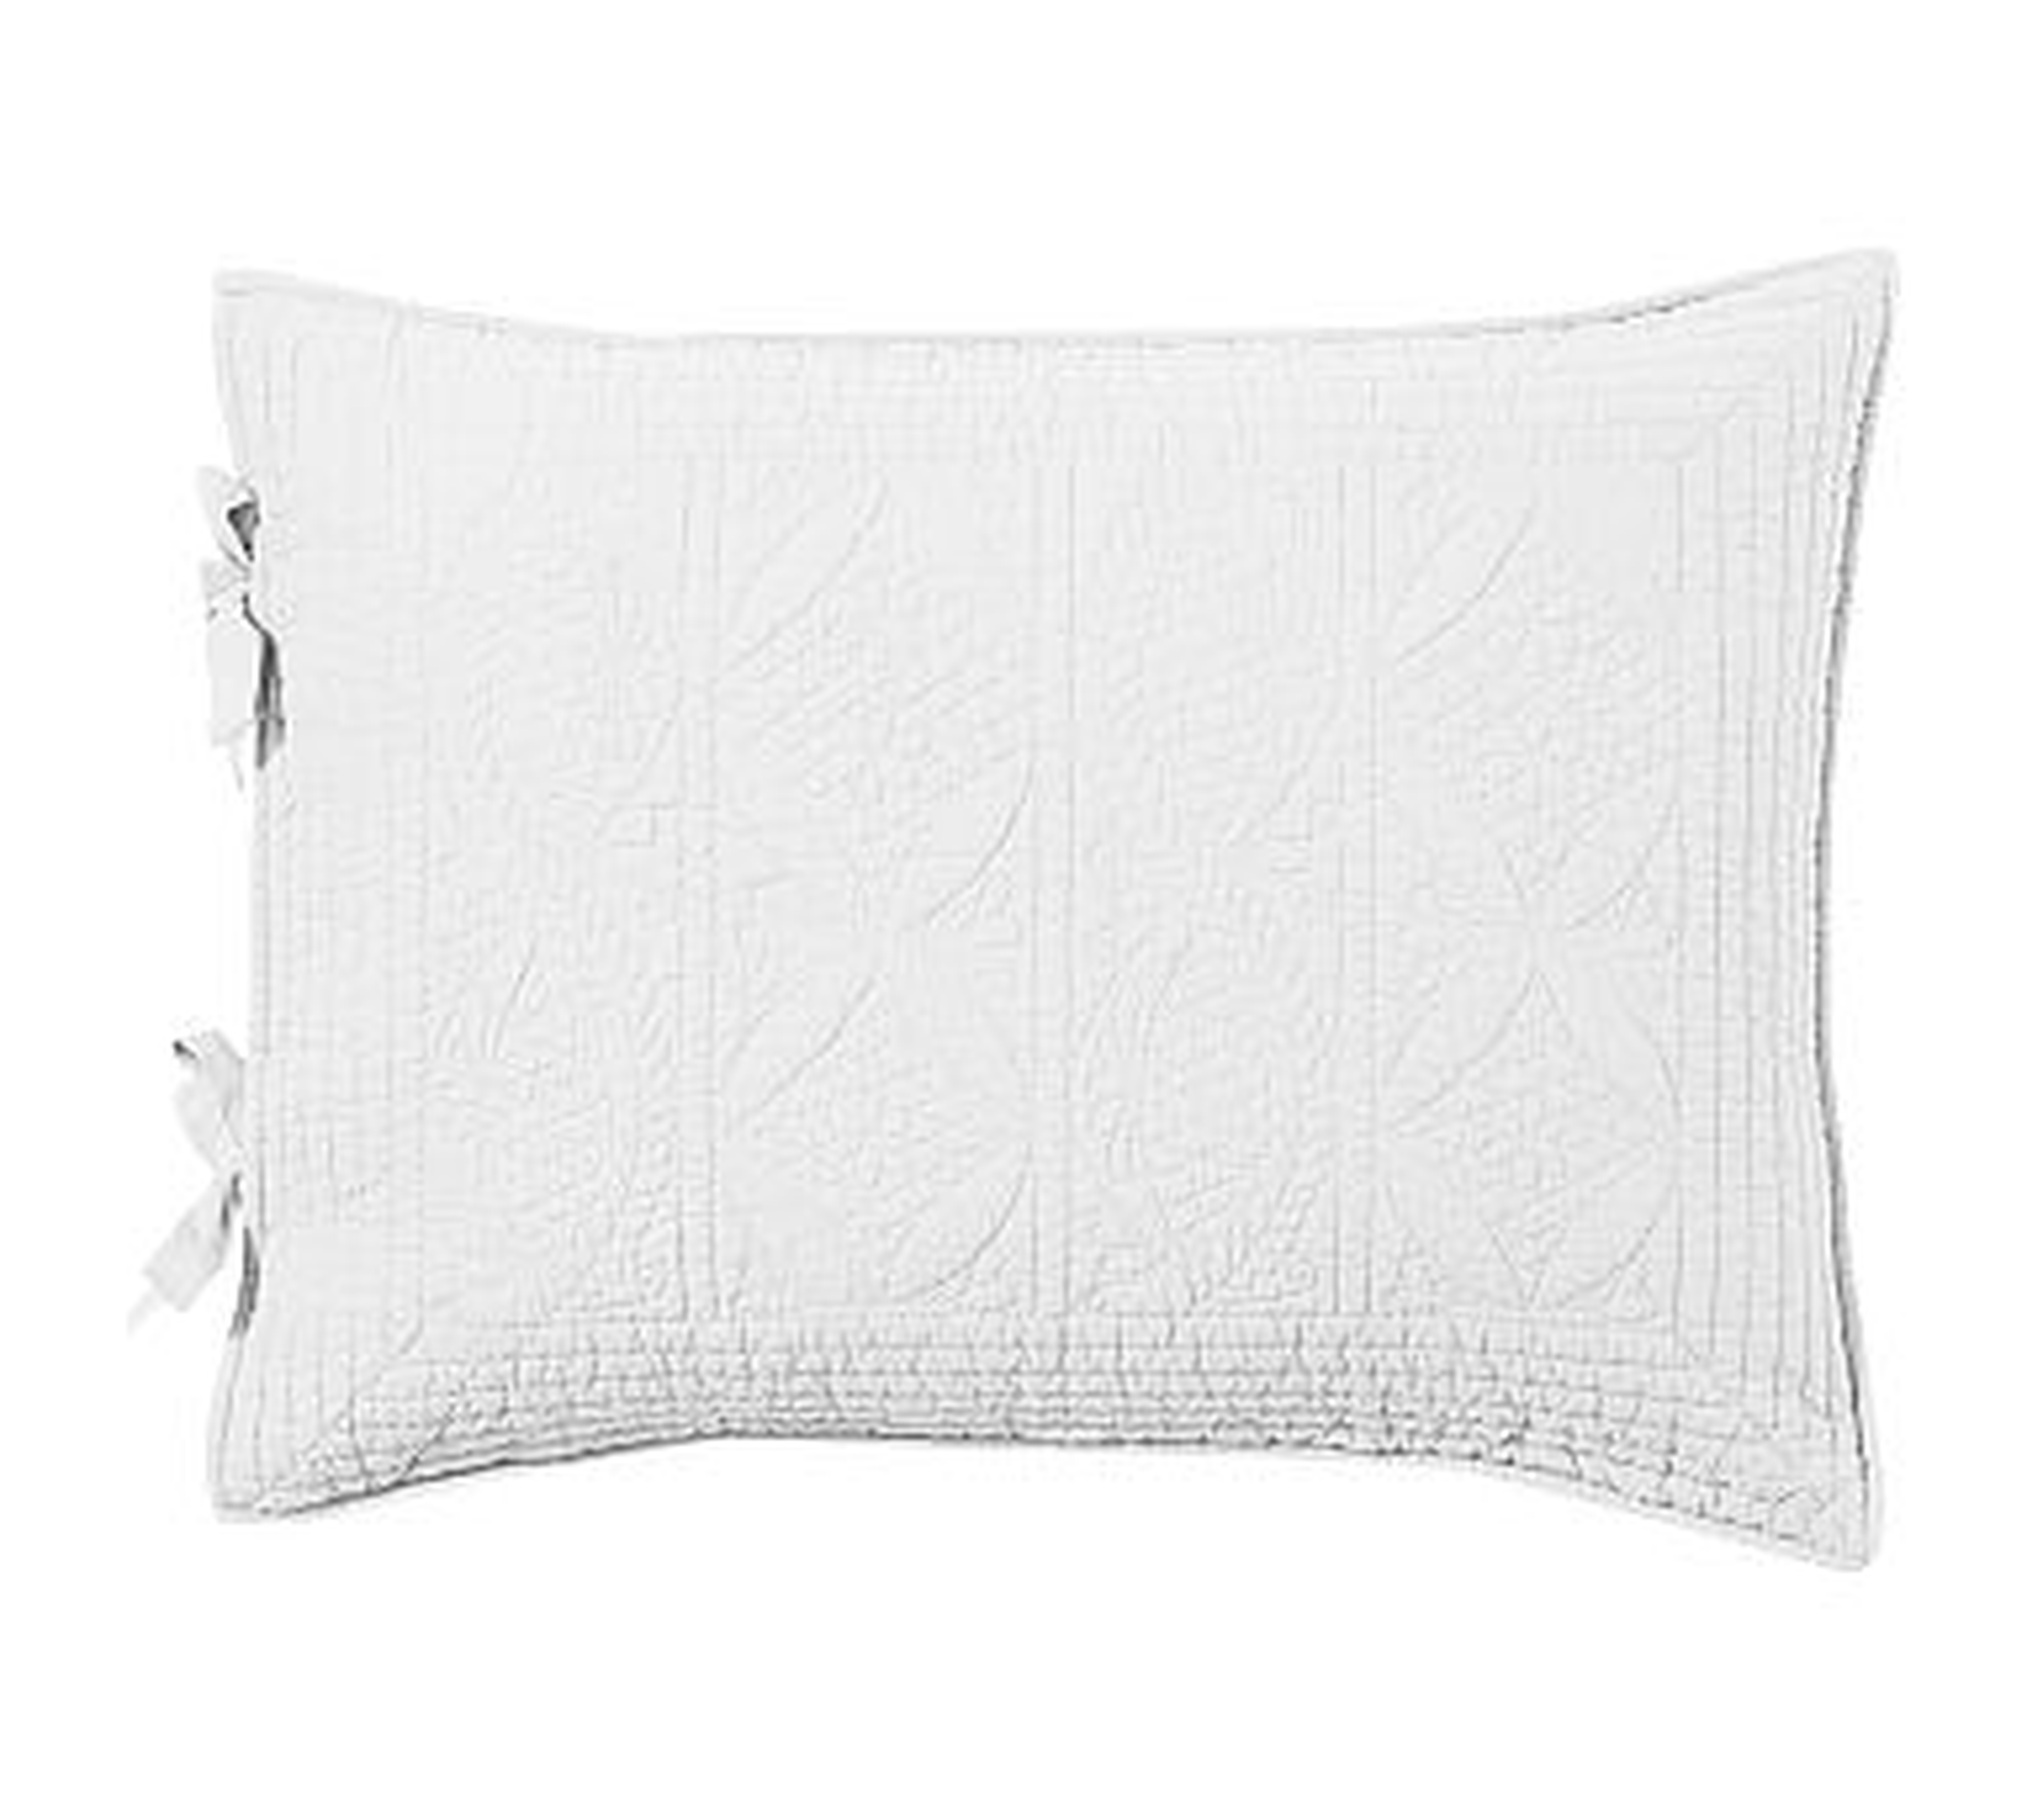 Hanna Quilted Sham, Standard, White - Pottery Barn